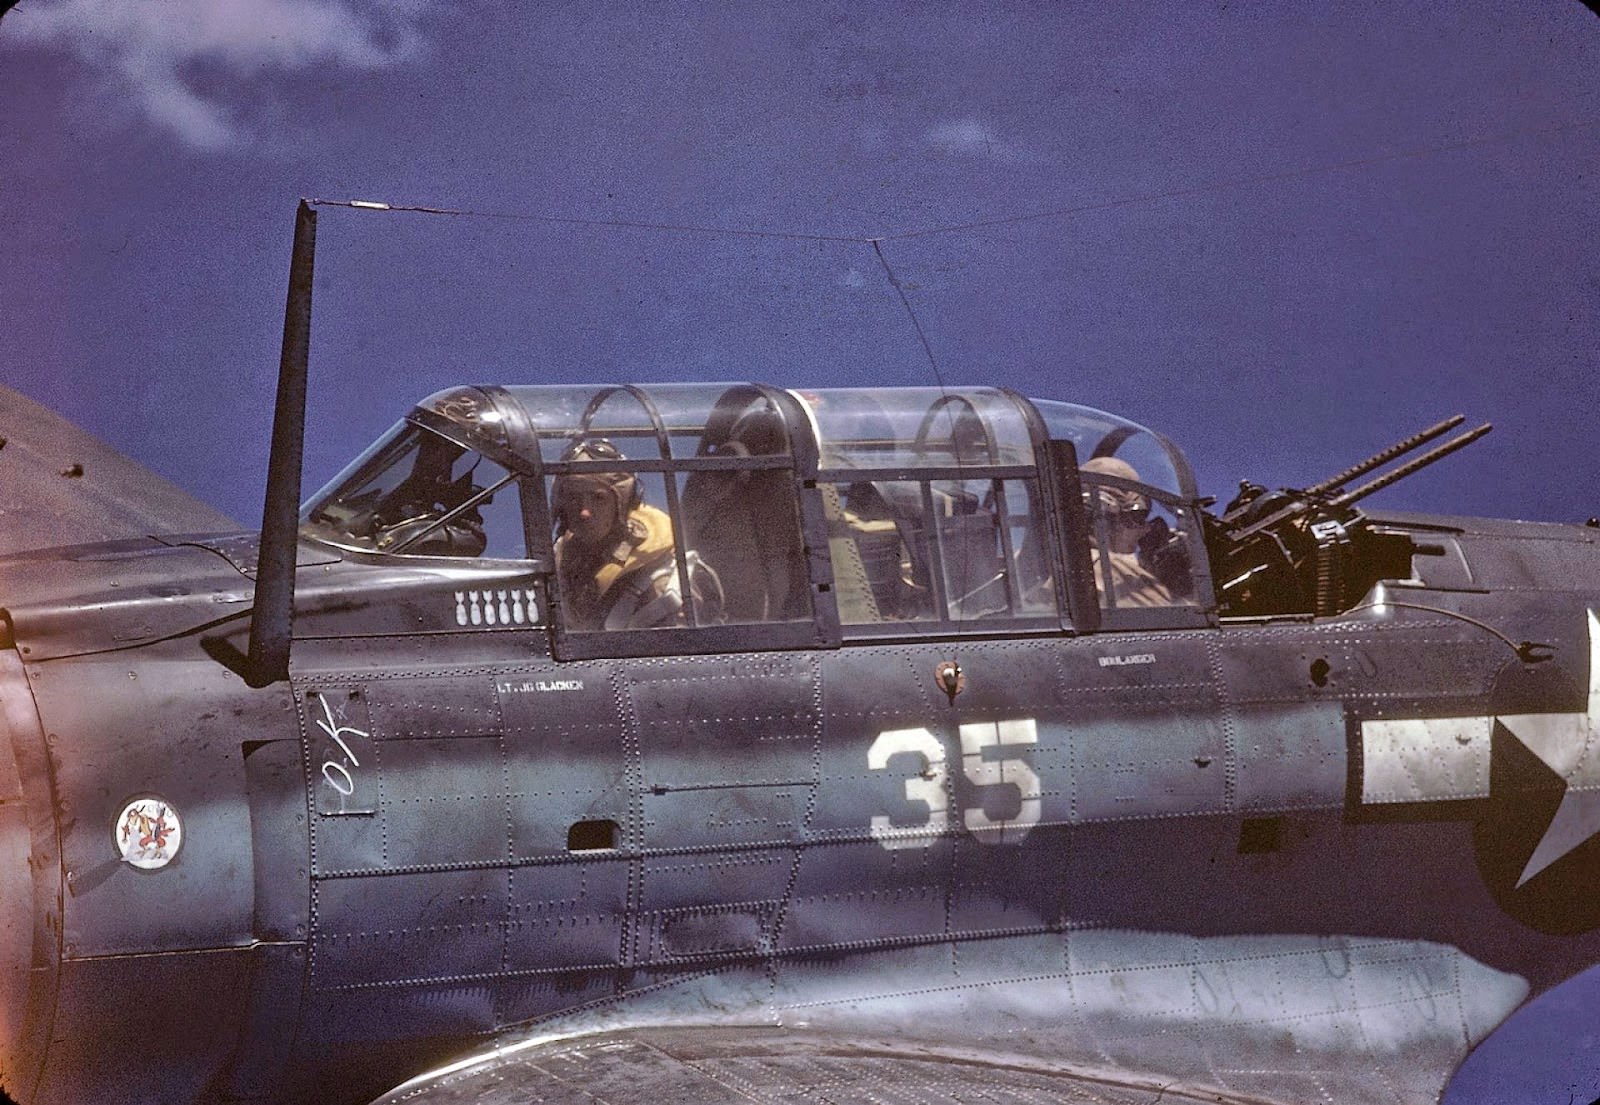 Close-up, in-flight view of a Douglas SBD Dauntless piloted by American Lt. George Glacken (left) with his gunner Leo Boulanger, near New Guinea, early April, 1944.